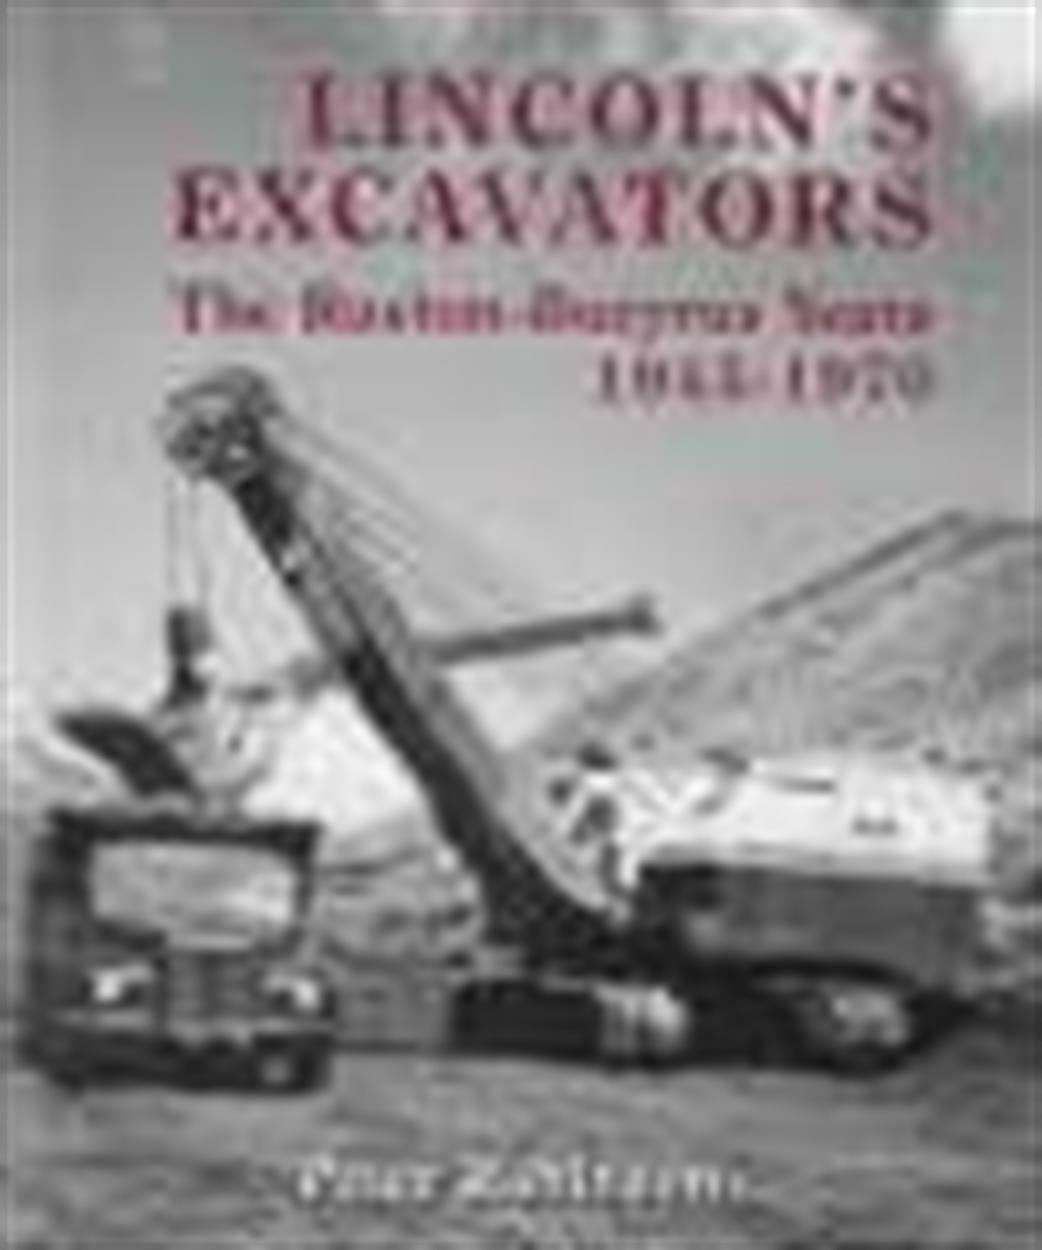 Roundoak Publishing  9781871565522 Lincoln's Excavators 1945-1970 Book by Peter Robinson